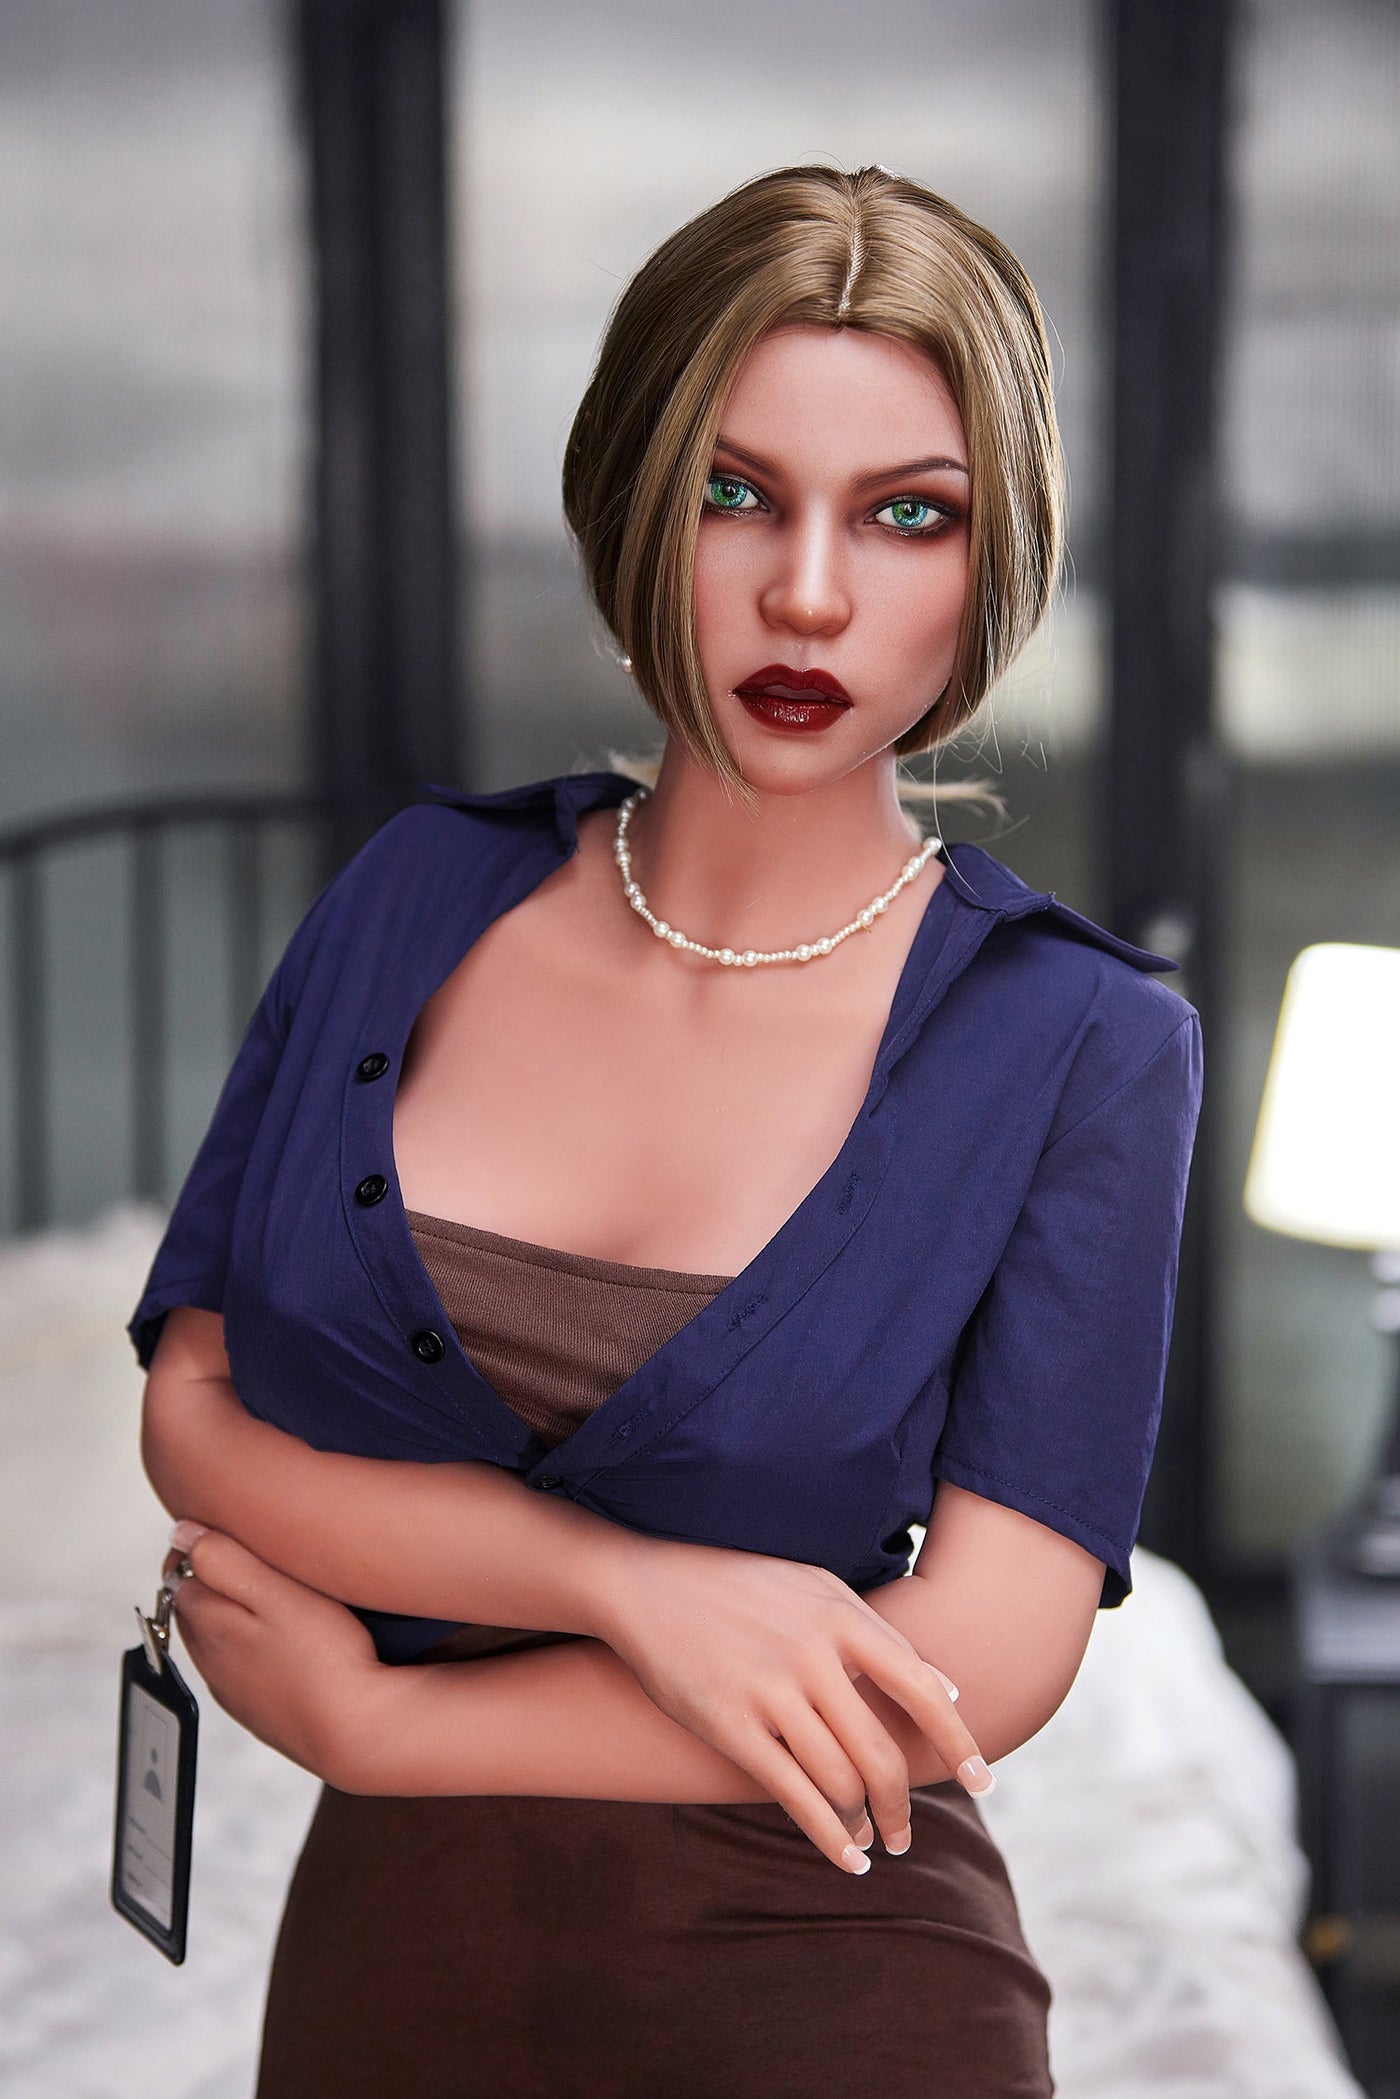 5ft2in (158cm) Lifelike Love Doll with Movable Jaw - Mallory